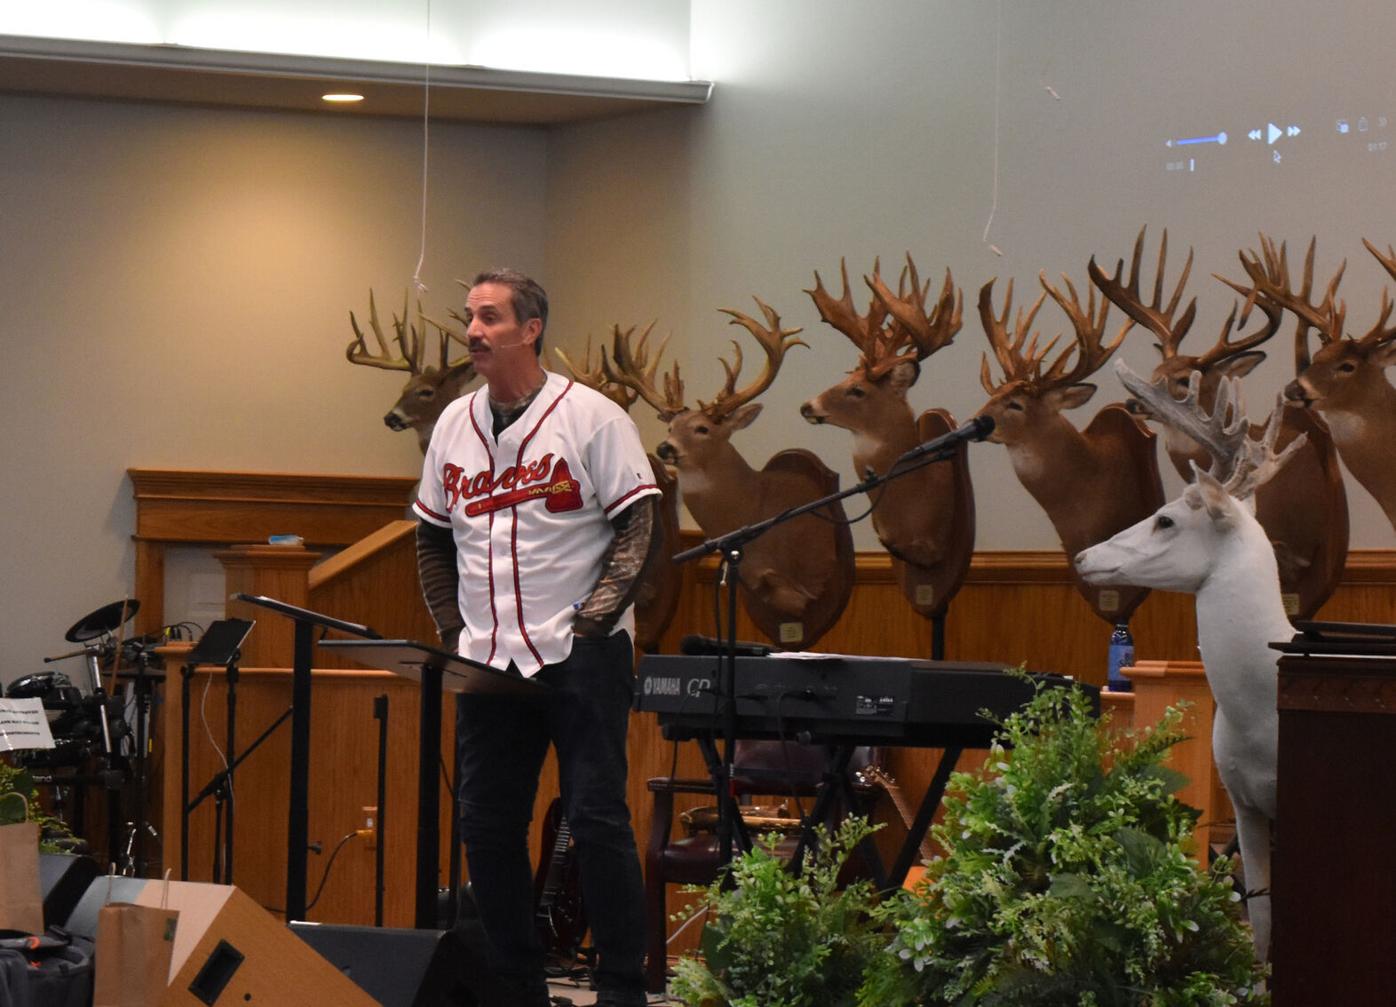 It wasn't about me, it was about him': Sid Bream speaks at Wild Game Supper